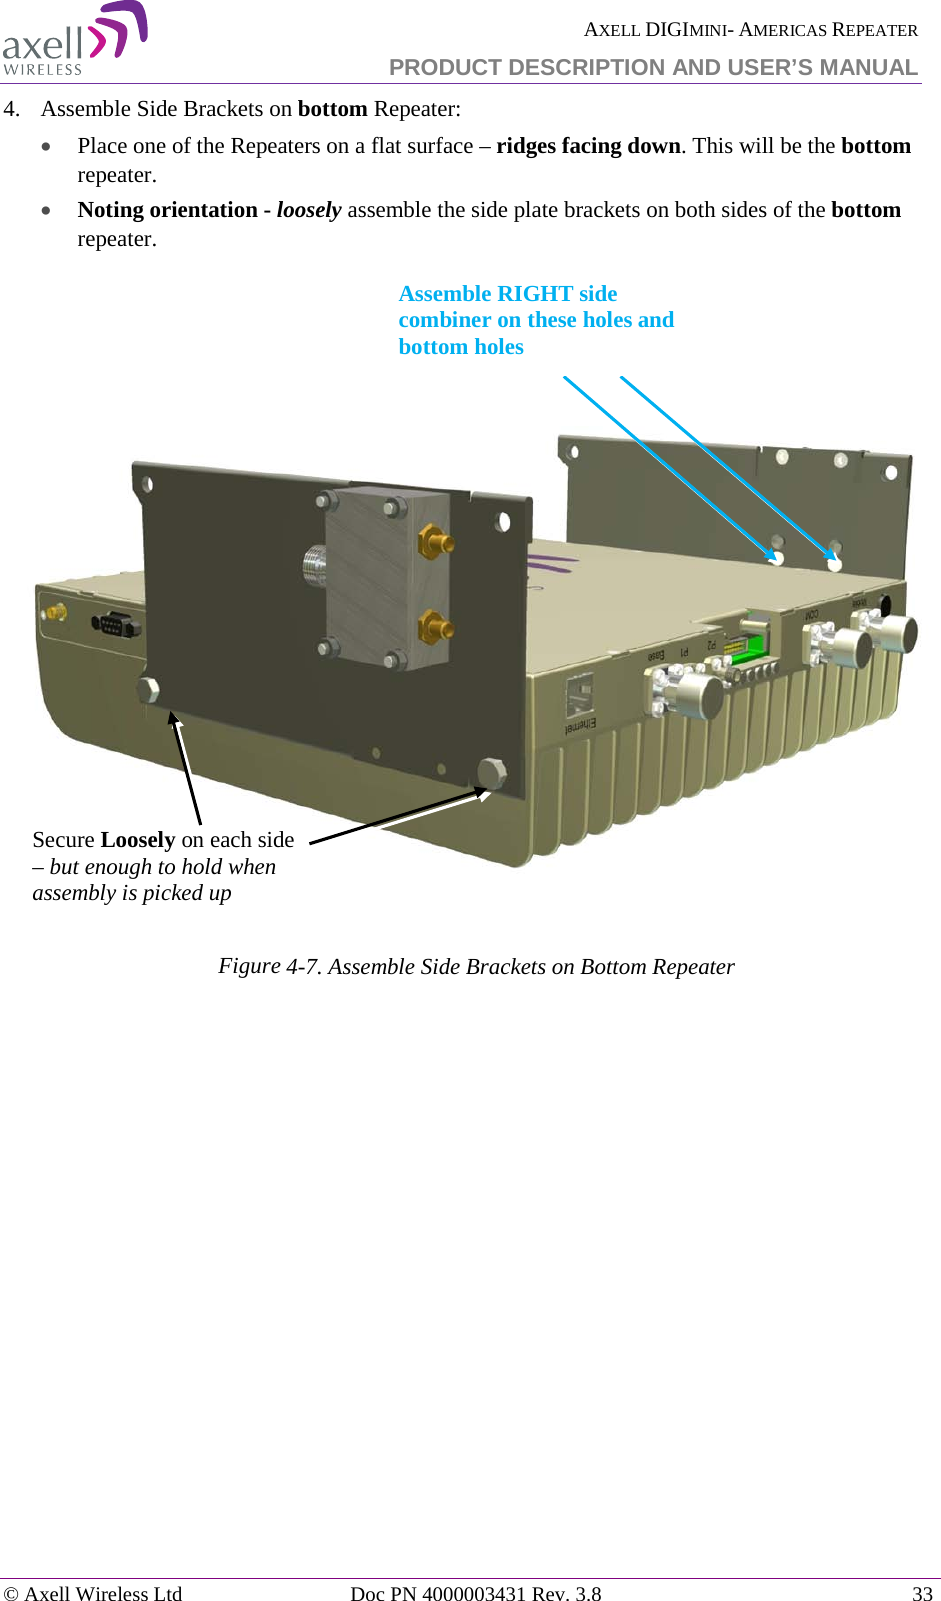  AXELL DIGIMINI- AMERICAS REPEATER PRODUCT DESCRIPTION AND USER’S MANUAL © Axell Wireless Ltd Doc PN 4000003431 Rev. 3.8 33  4.  Assemble Side Brackets on bottom Repeater:  • Place one of the Repeaters on a flat surface – ridges facing down. This will be the bottom  repeater. • Noting orientation - loosely assemble the side plate brackets on both sides of the bottom repeater.        Figure  4-7. Assemble Side Brackets on Bottom Repeater      Secure Loosely on each side – but enough to hold when assembly is picked up Assemble RIGHT side combiner on these holes and bottom holes  